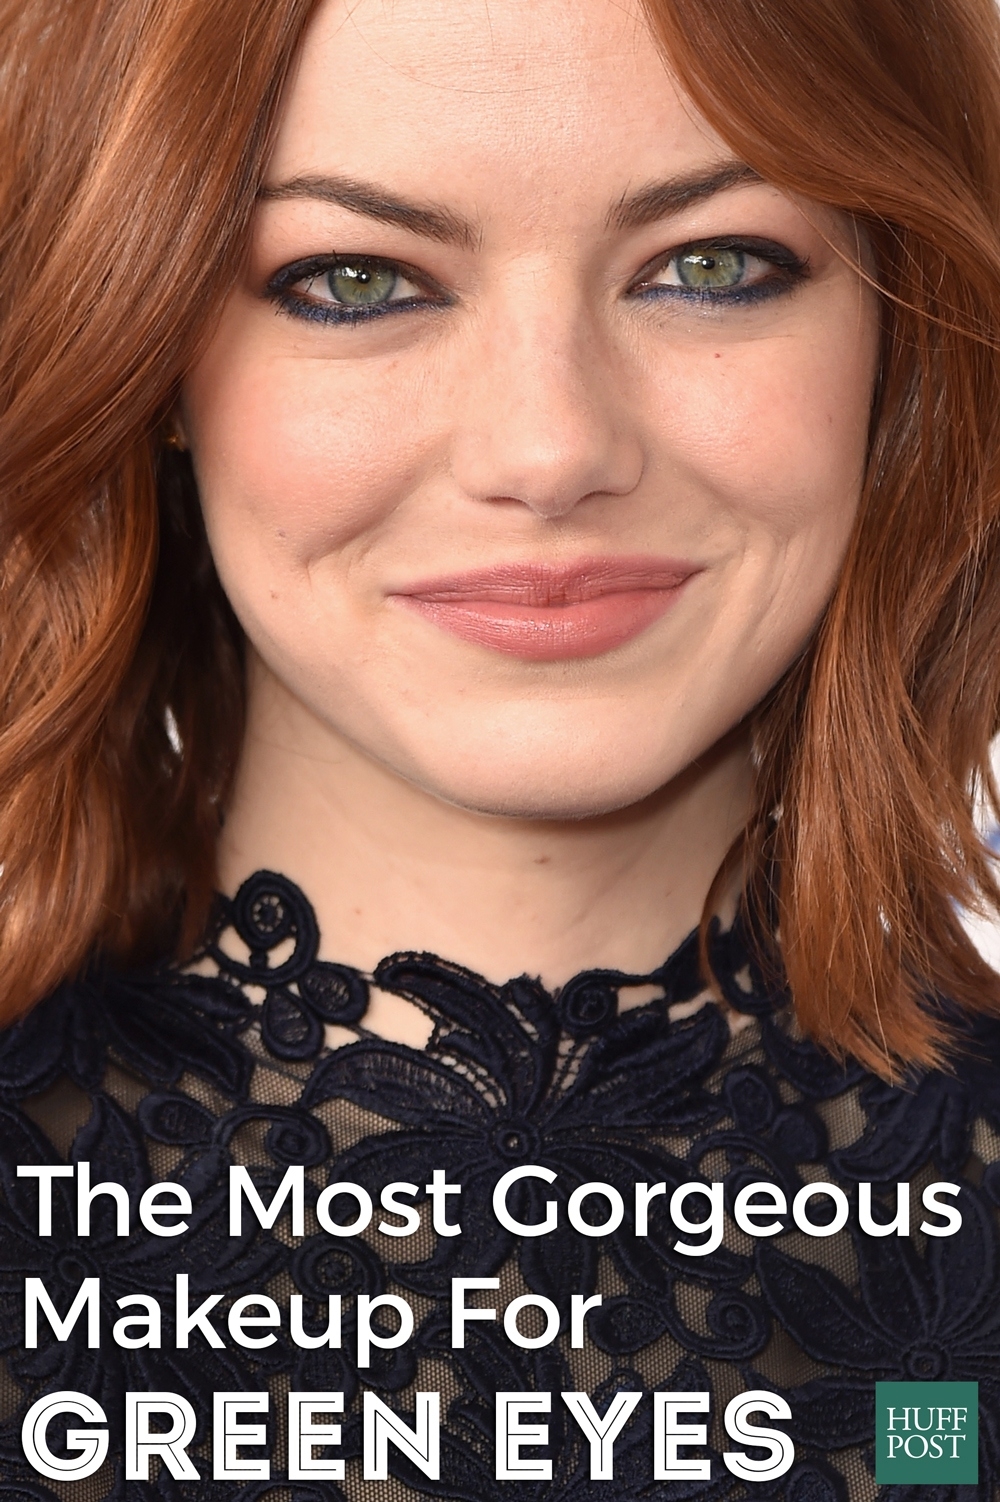 The Most Gorgeous Makeup For Green Eyes | Huffpost Life inside Best Eyeshadow Colors For Green Eyes And Pale Skin